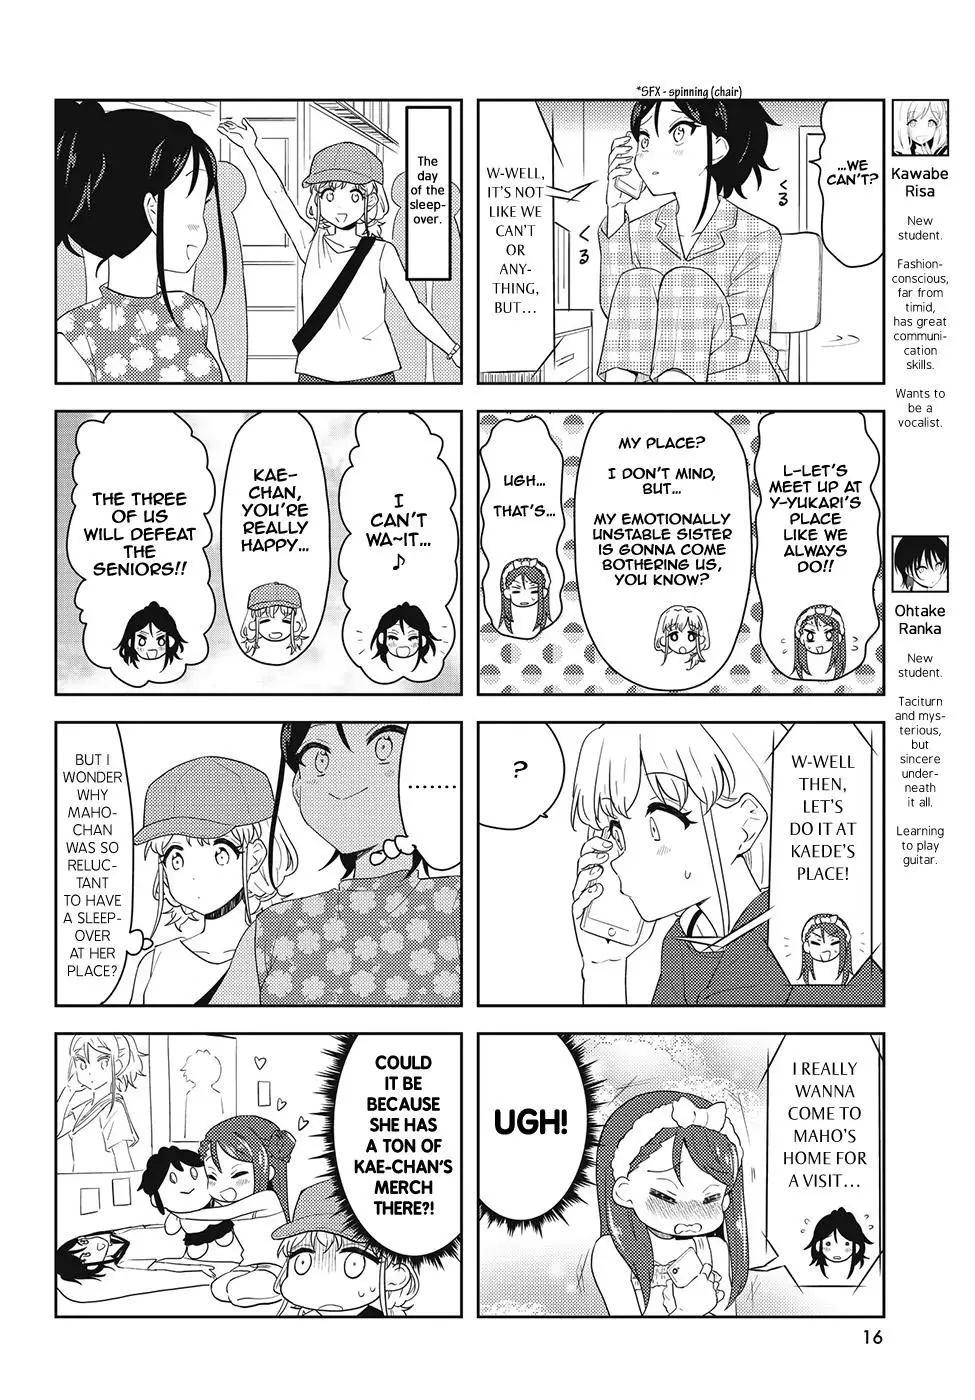 K-On! Shuffle - 43 page 4-fe766580